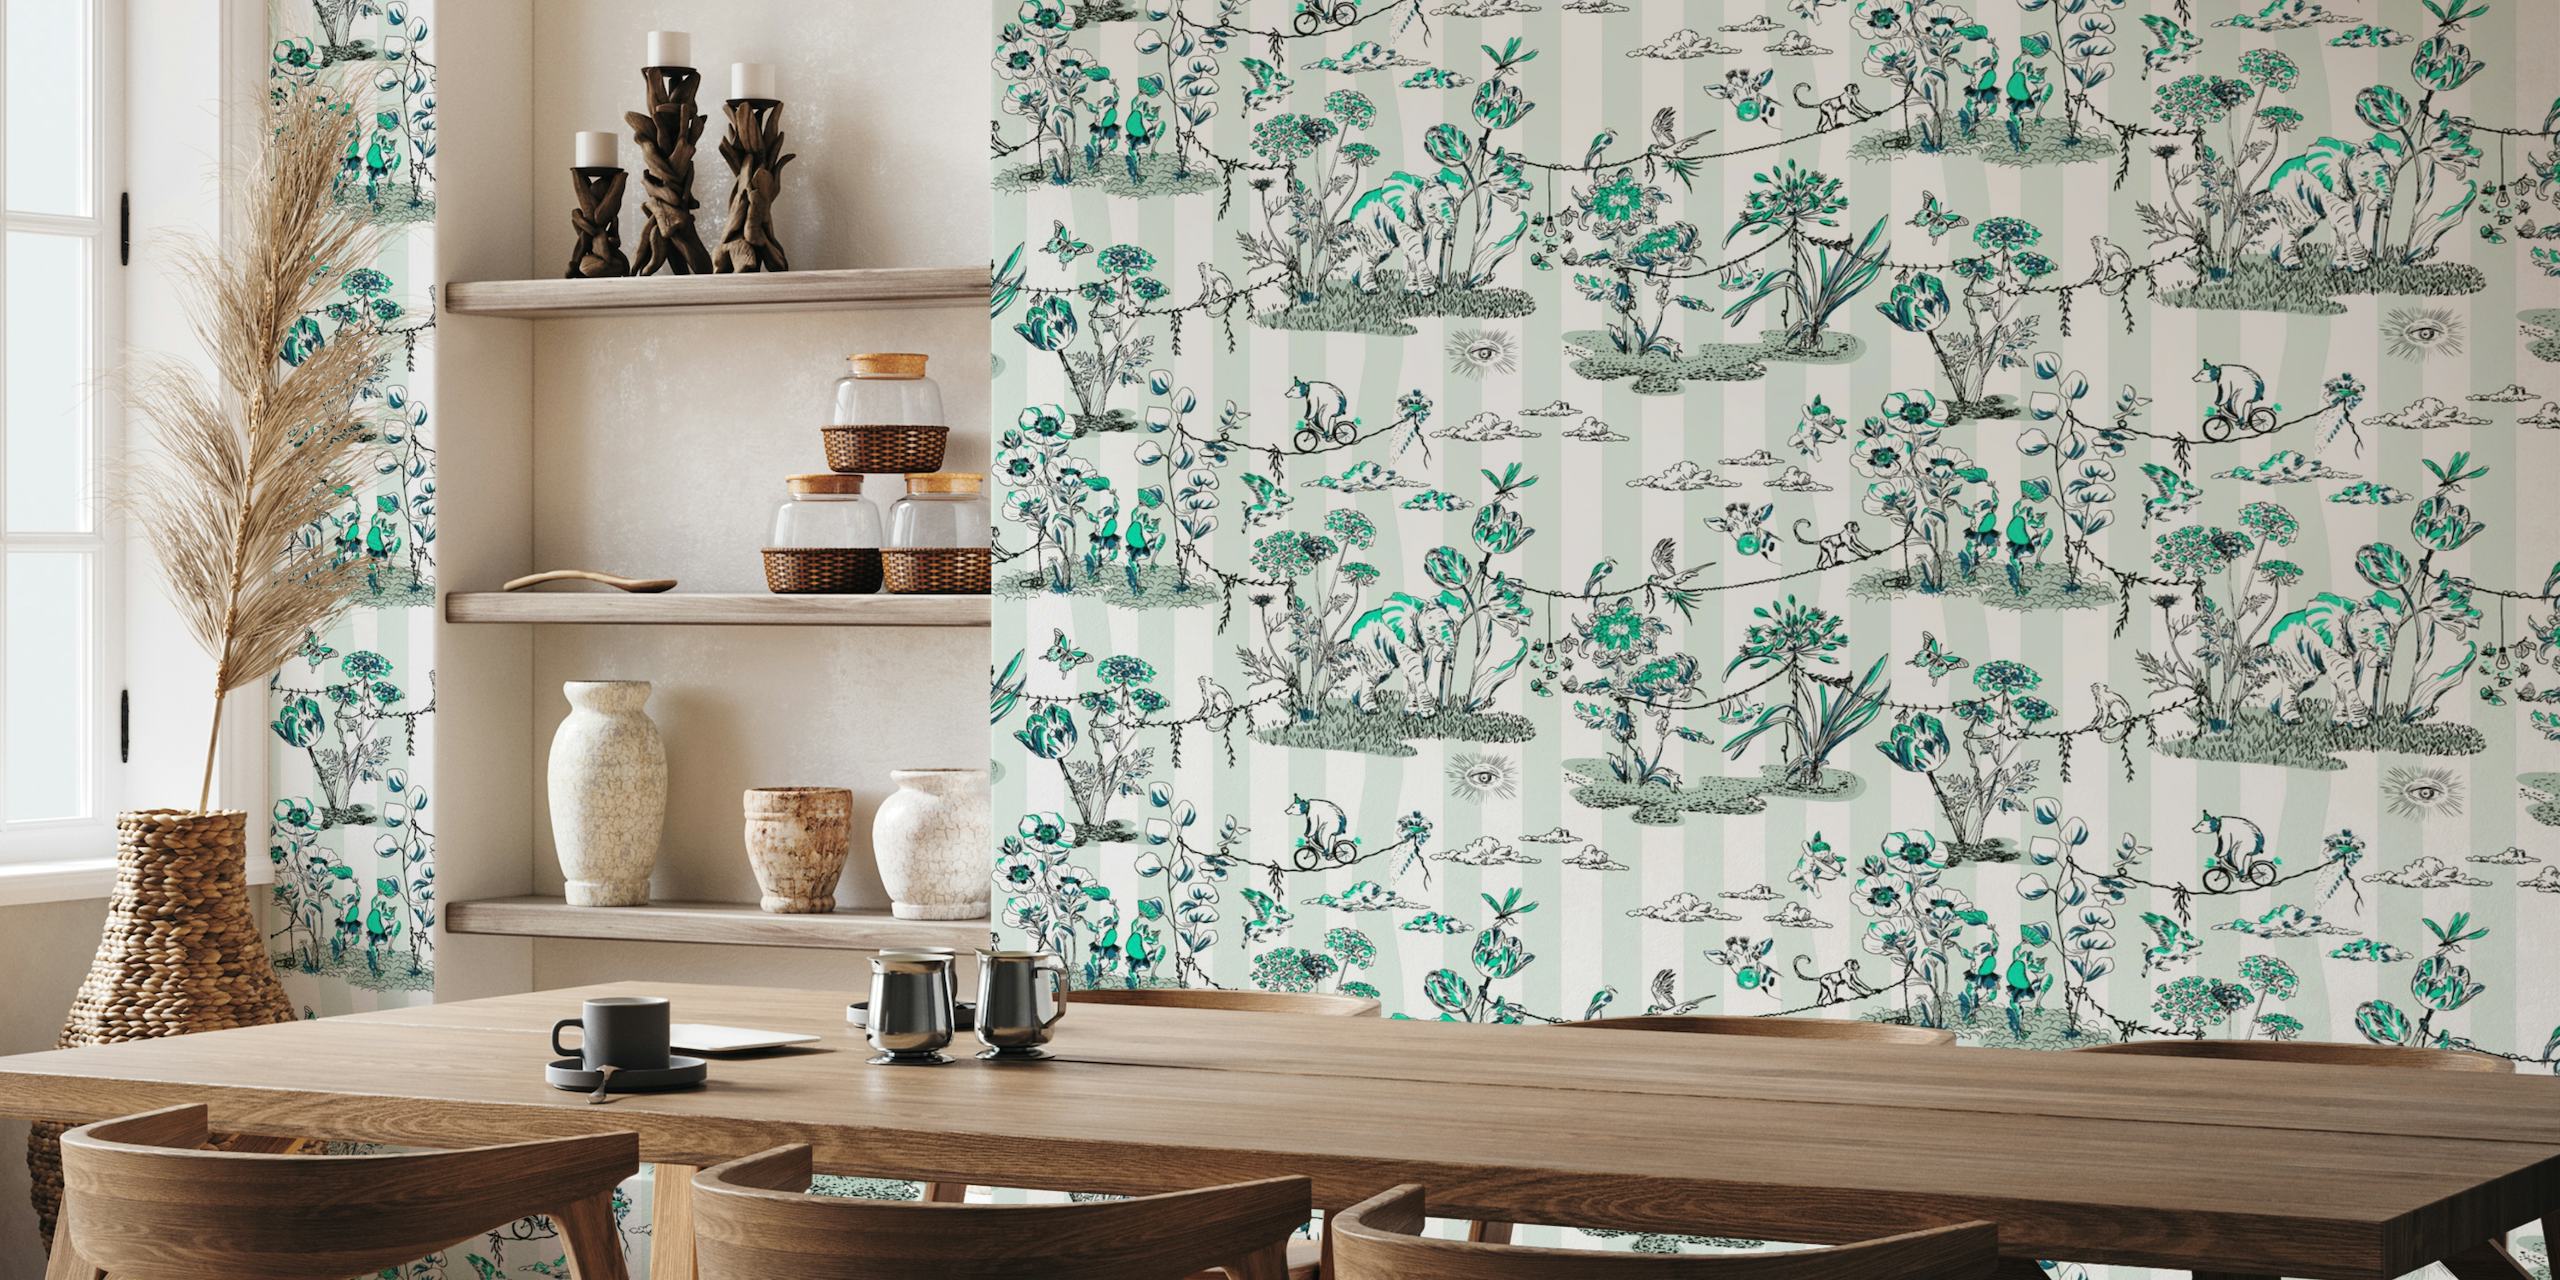 Whimsical Jungel Party water blue turquoise - L wallpaper